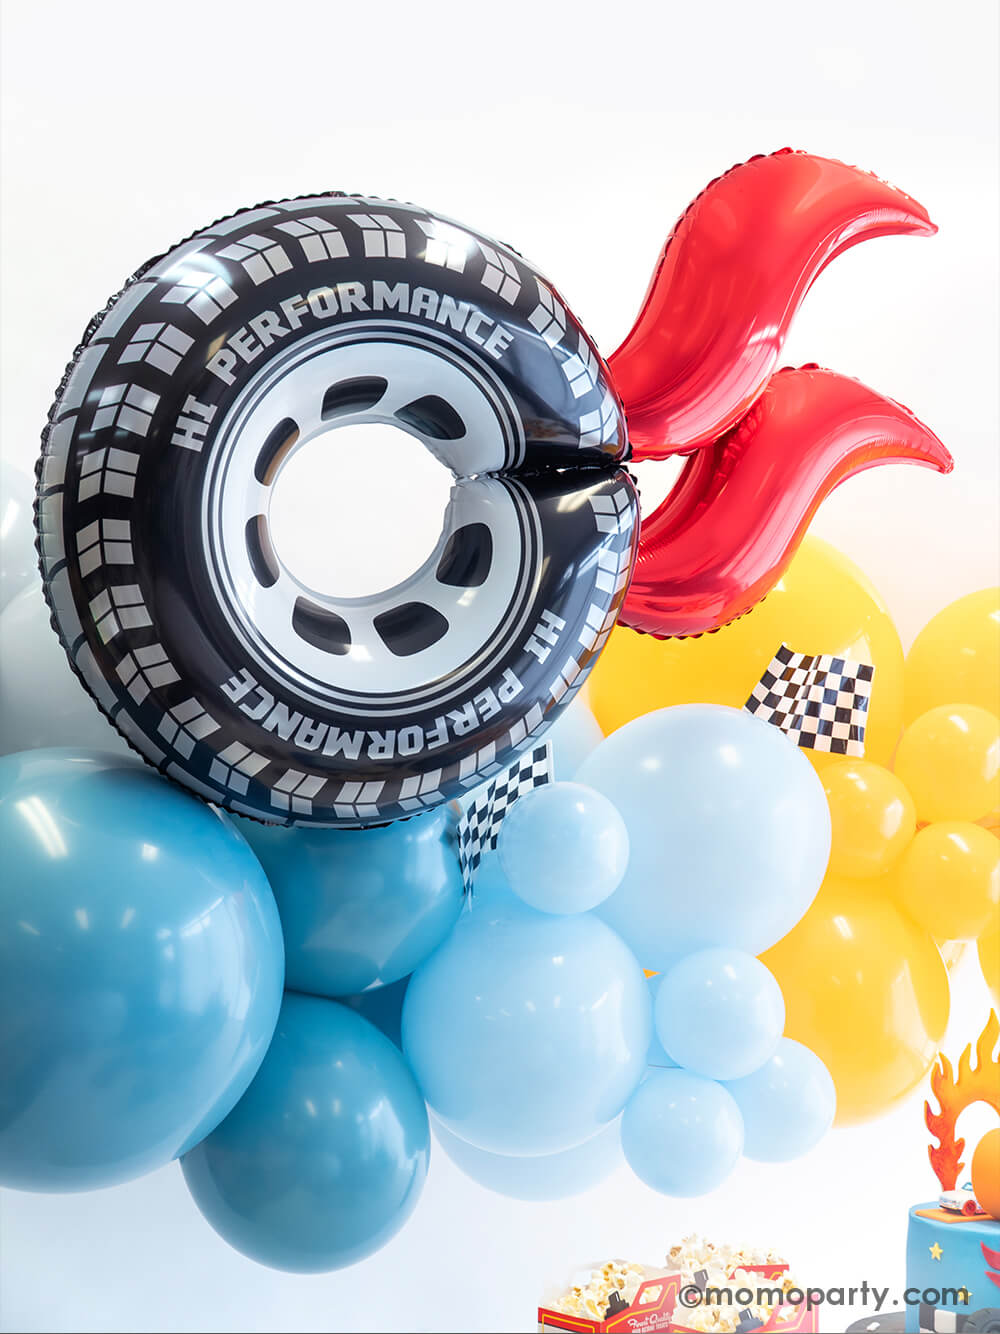 A close up of Momo Party's Hot Wheels themed balloon decoration featuring an organic balloon garland in orange and blue, and a wheel shaped foil balloon with red curve balloons attached as flame. On the balloon cloud there are some race car checkered flags adorned, making this a perfect decoration backdrop idea for kid's Hot Wheels themed race car birthday party.